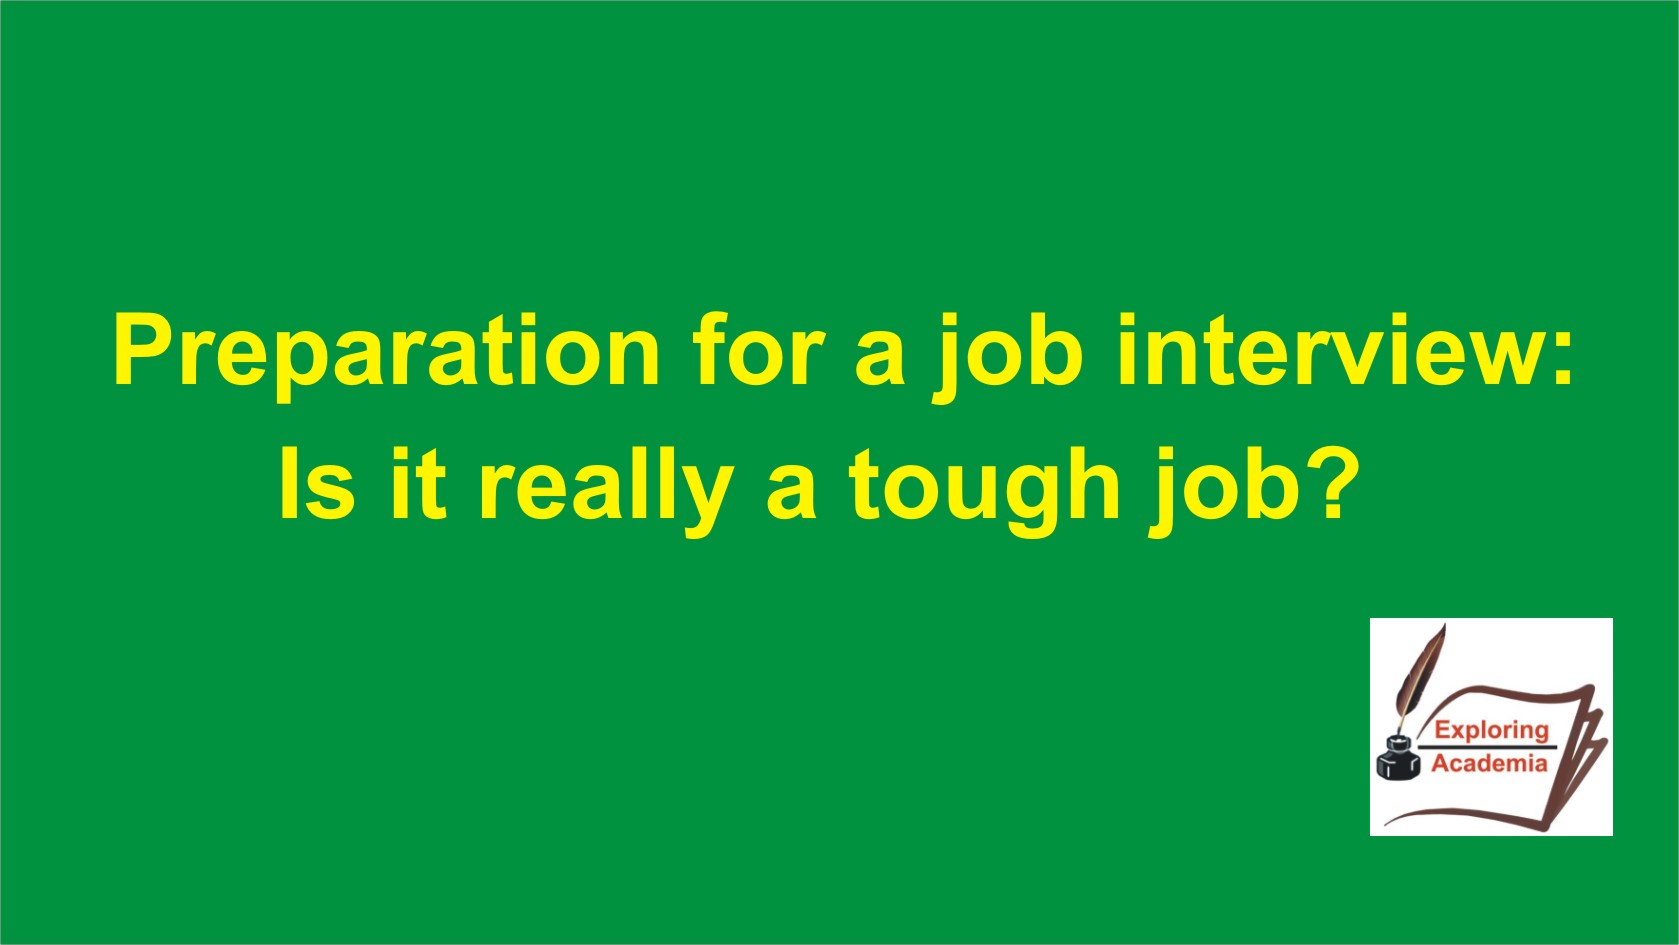 Preparation for a job interview: Is it really a tough job?